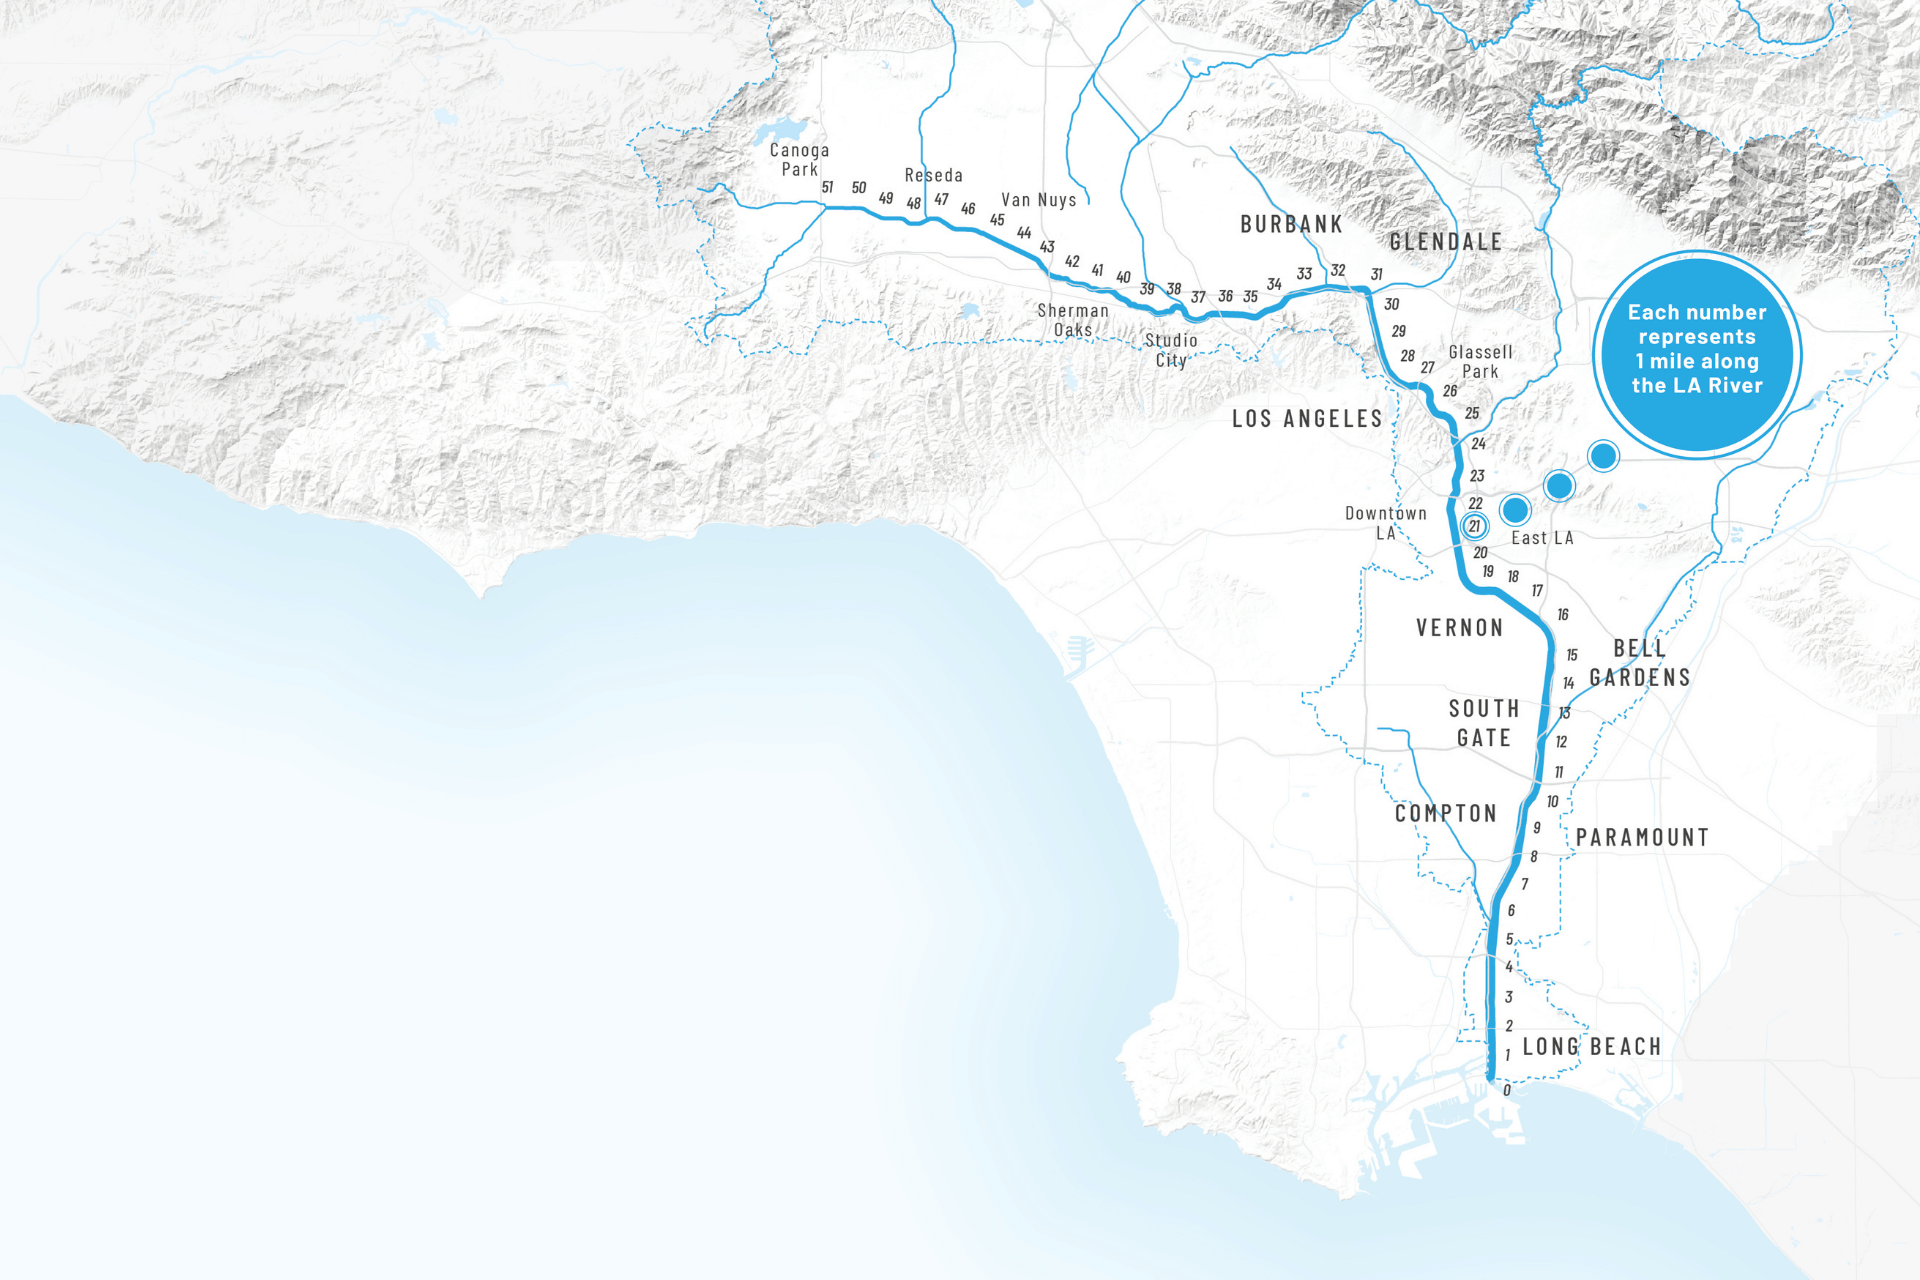 Water resources - Los Angeles River